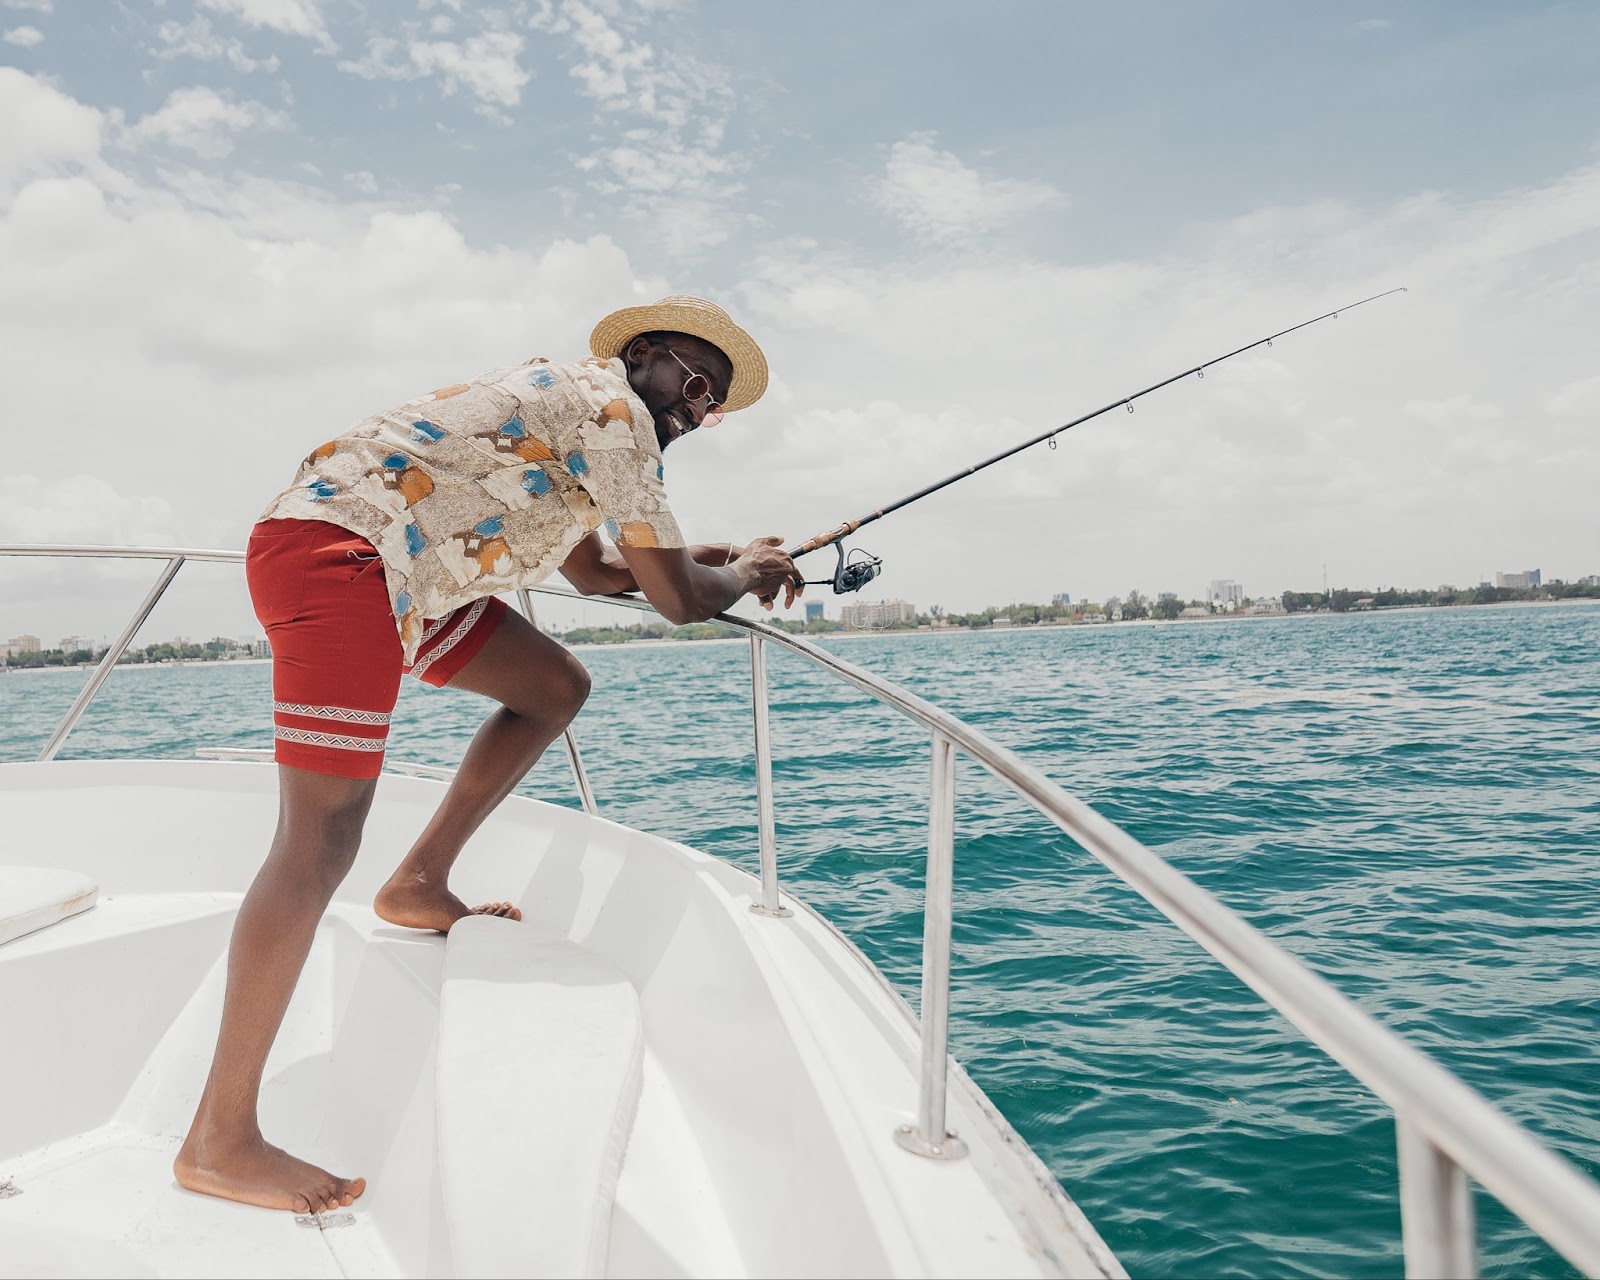 Marina Pointe offers residents a private entrance into Tampa Bay, some of Florida’s best fishing.